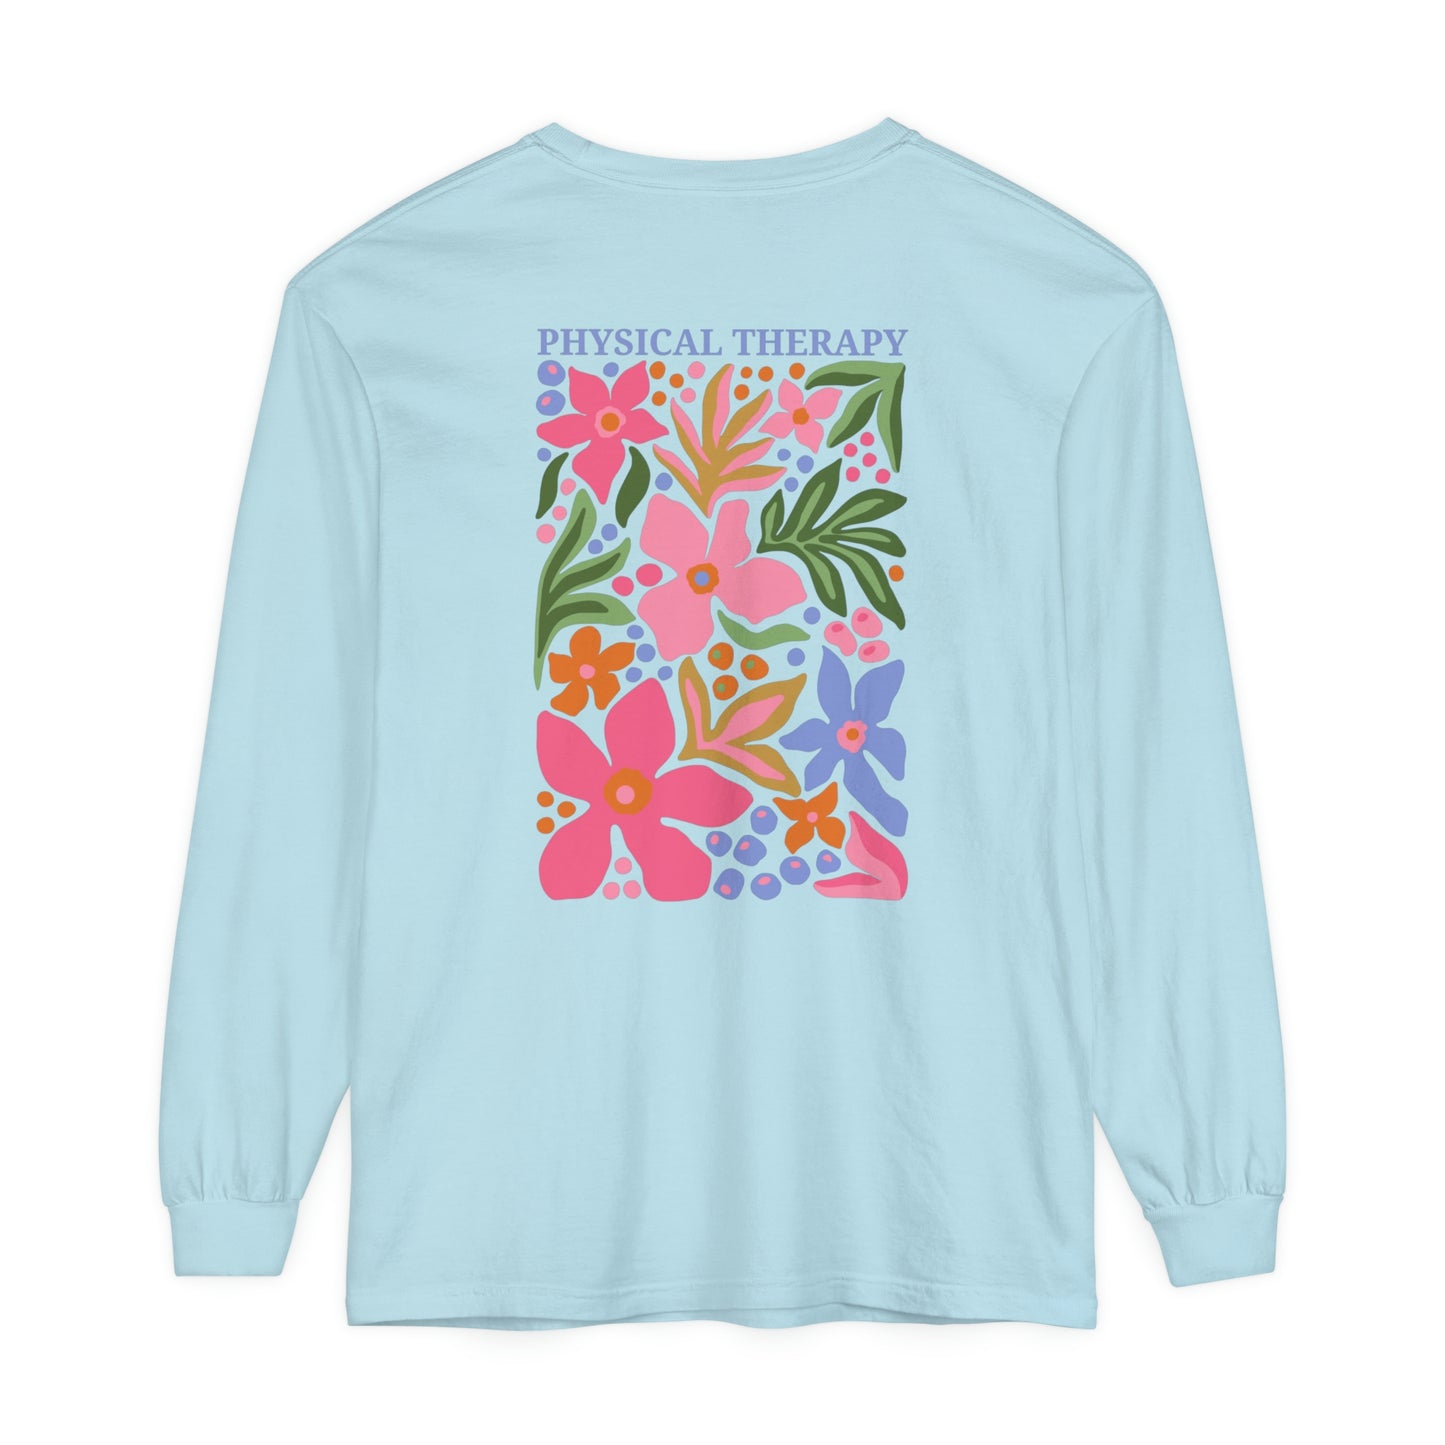 Physical Therapy Long Sleeve Comfort Colors T-shirt